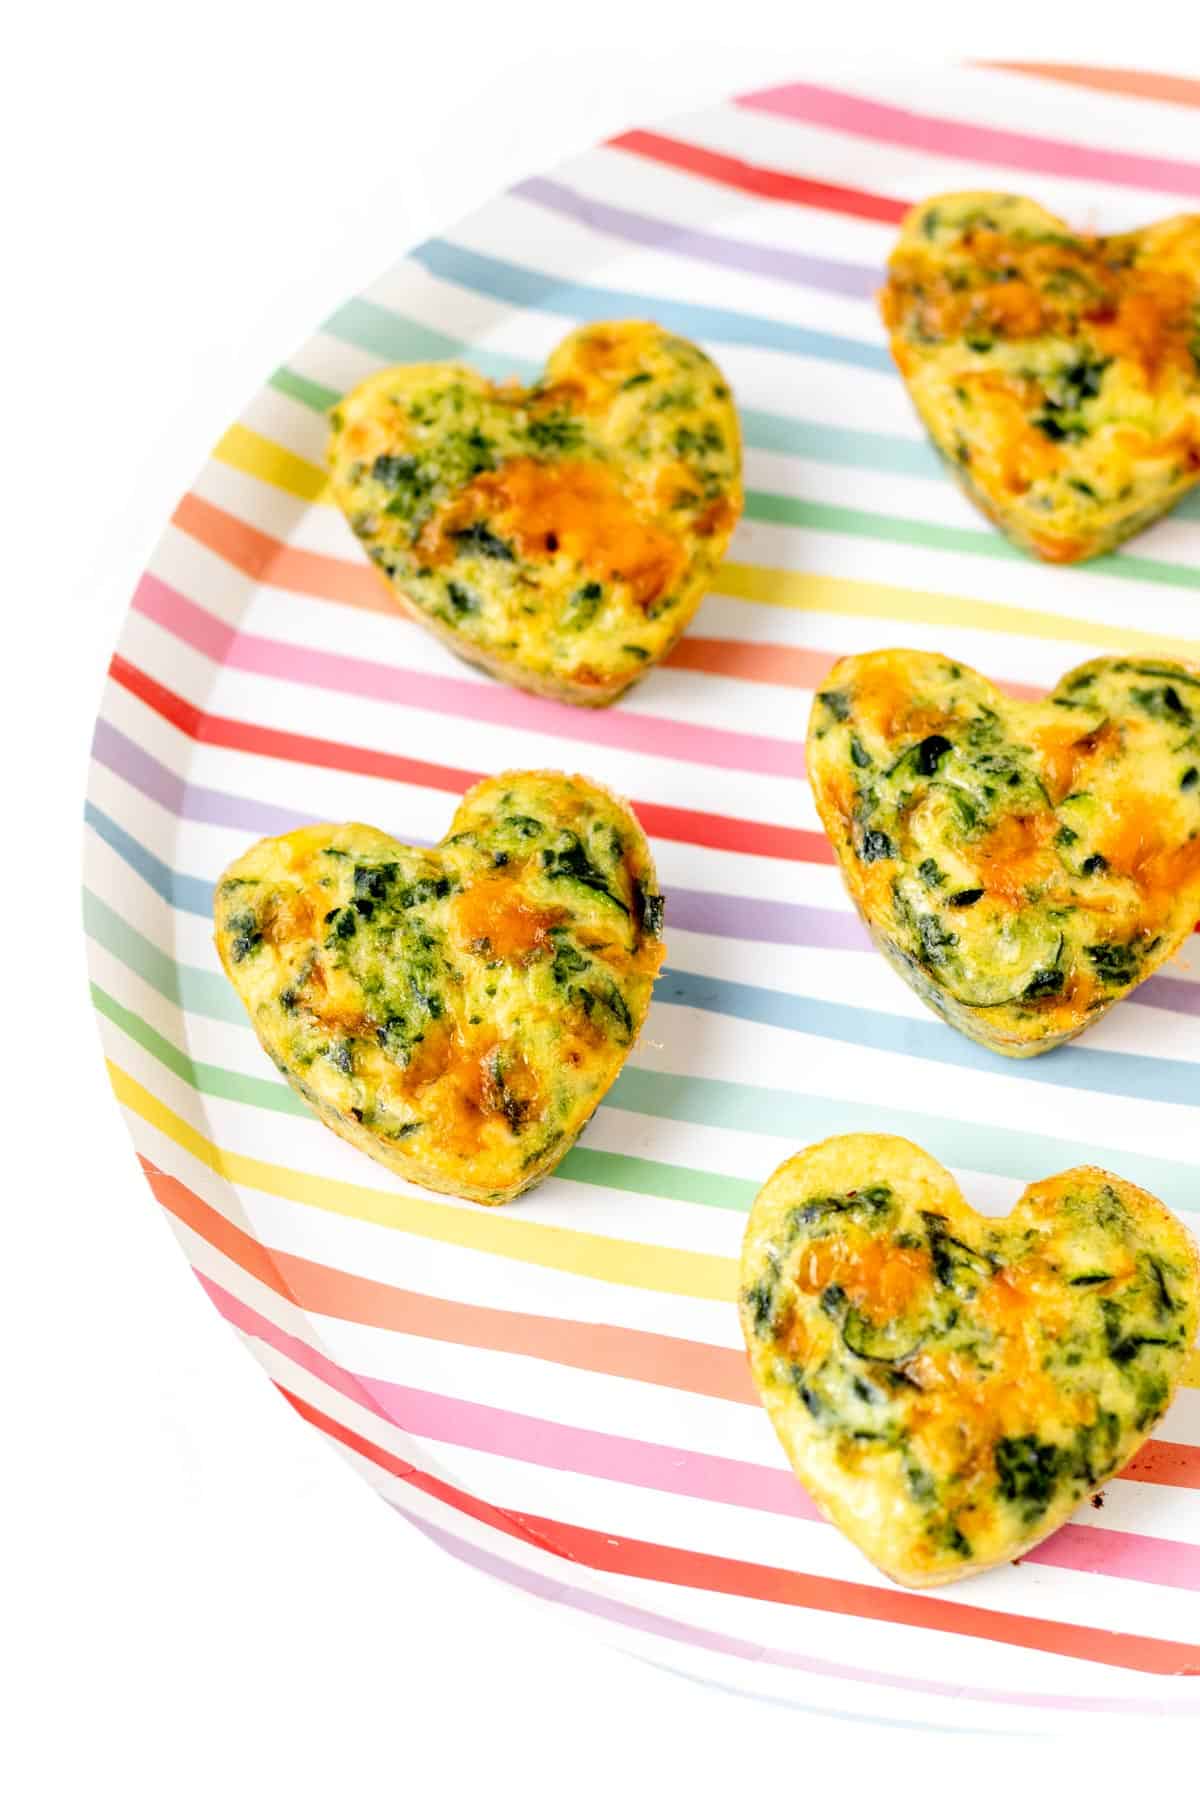 A few of the zucchini frittata muffins on a striped colorful plate.